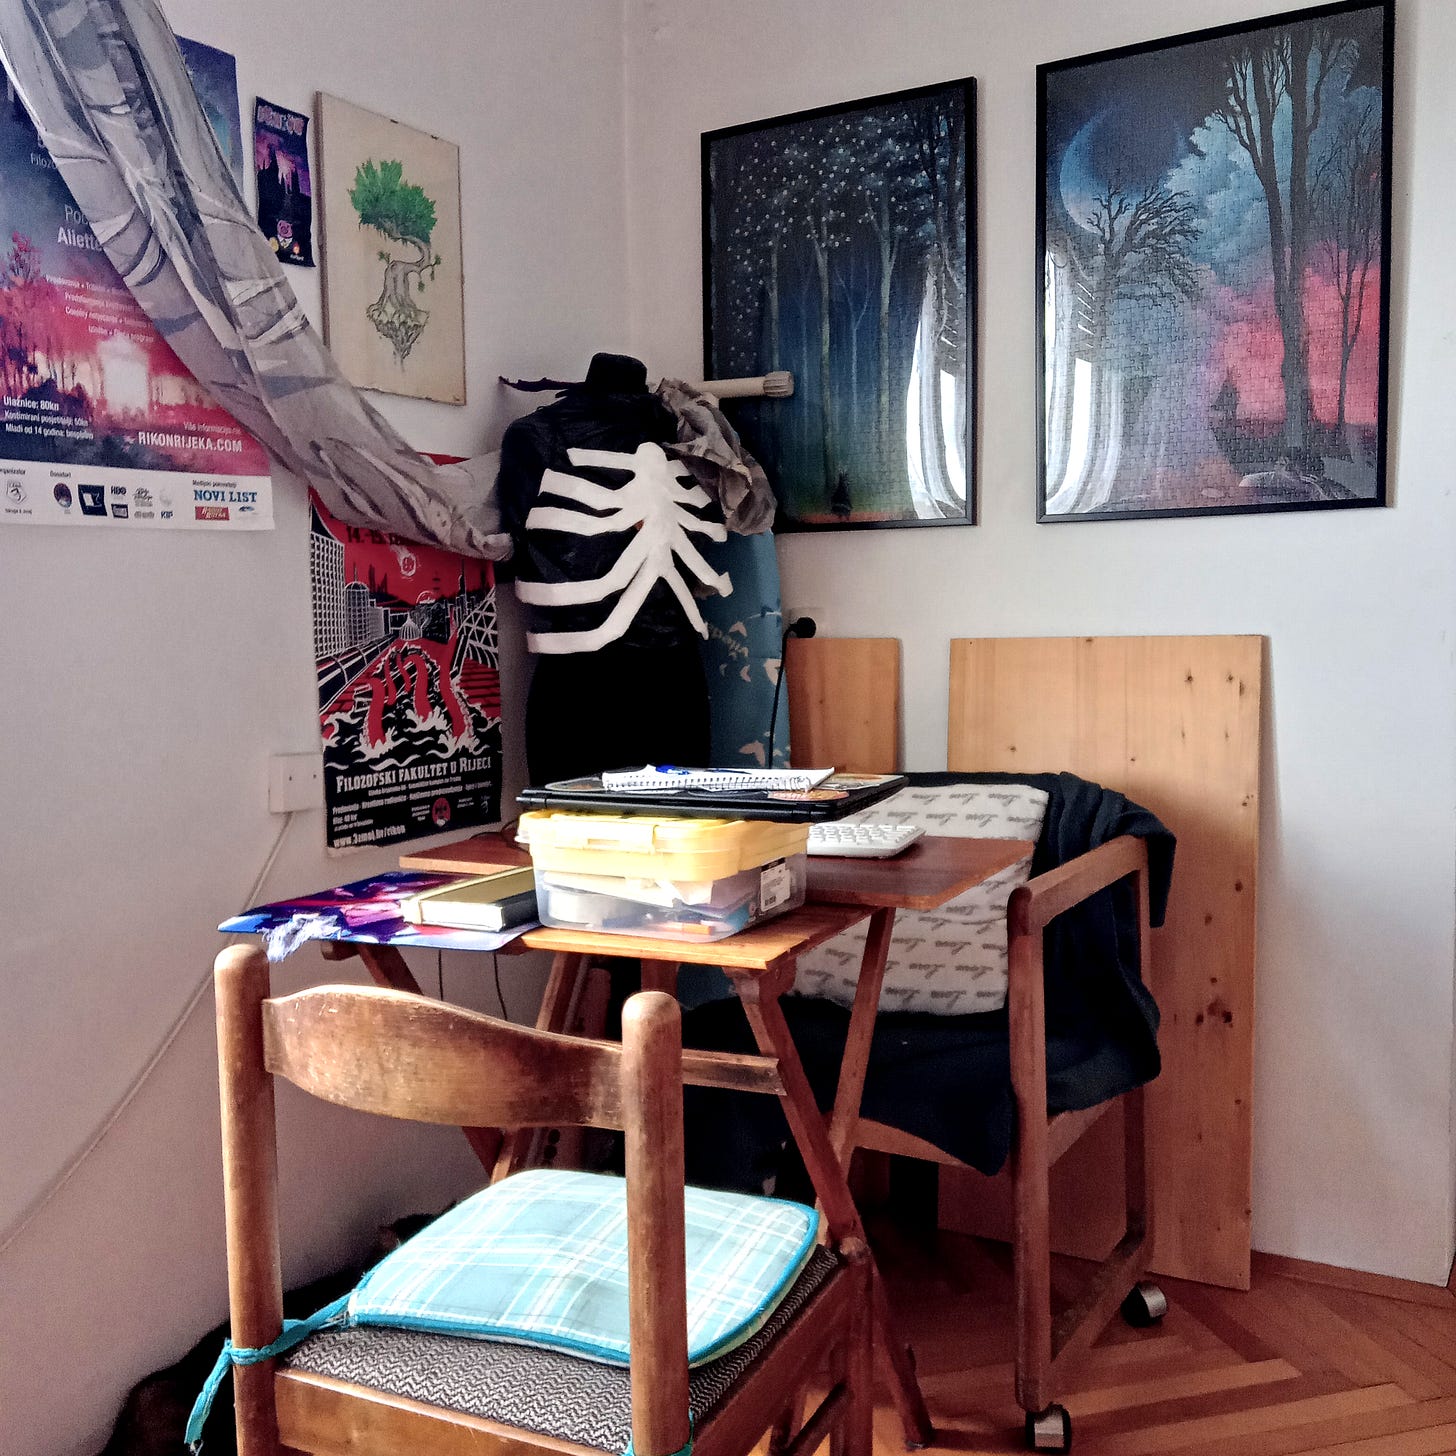 A corner of the living room with Rikon convention posters and Heye Puzzles by Andy Kehoe framed on the wall, a portable wooden balcony desk with a box of stationery which hold a closed laptop, two chairs, and a paper mache human ribcage on a black-cloth mannequin at the back, in the very corner.